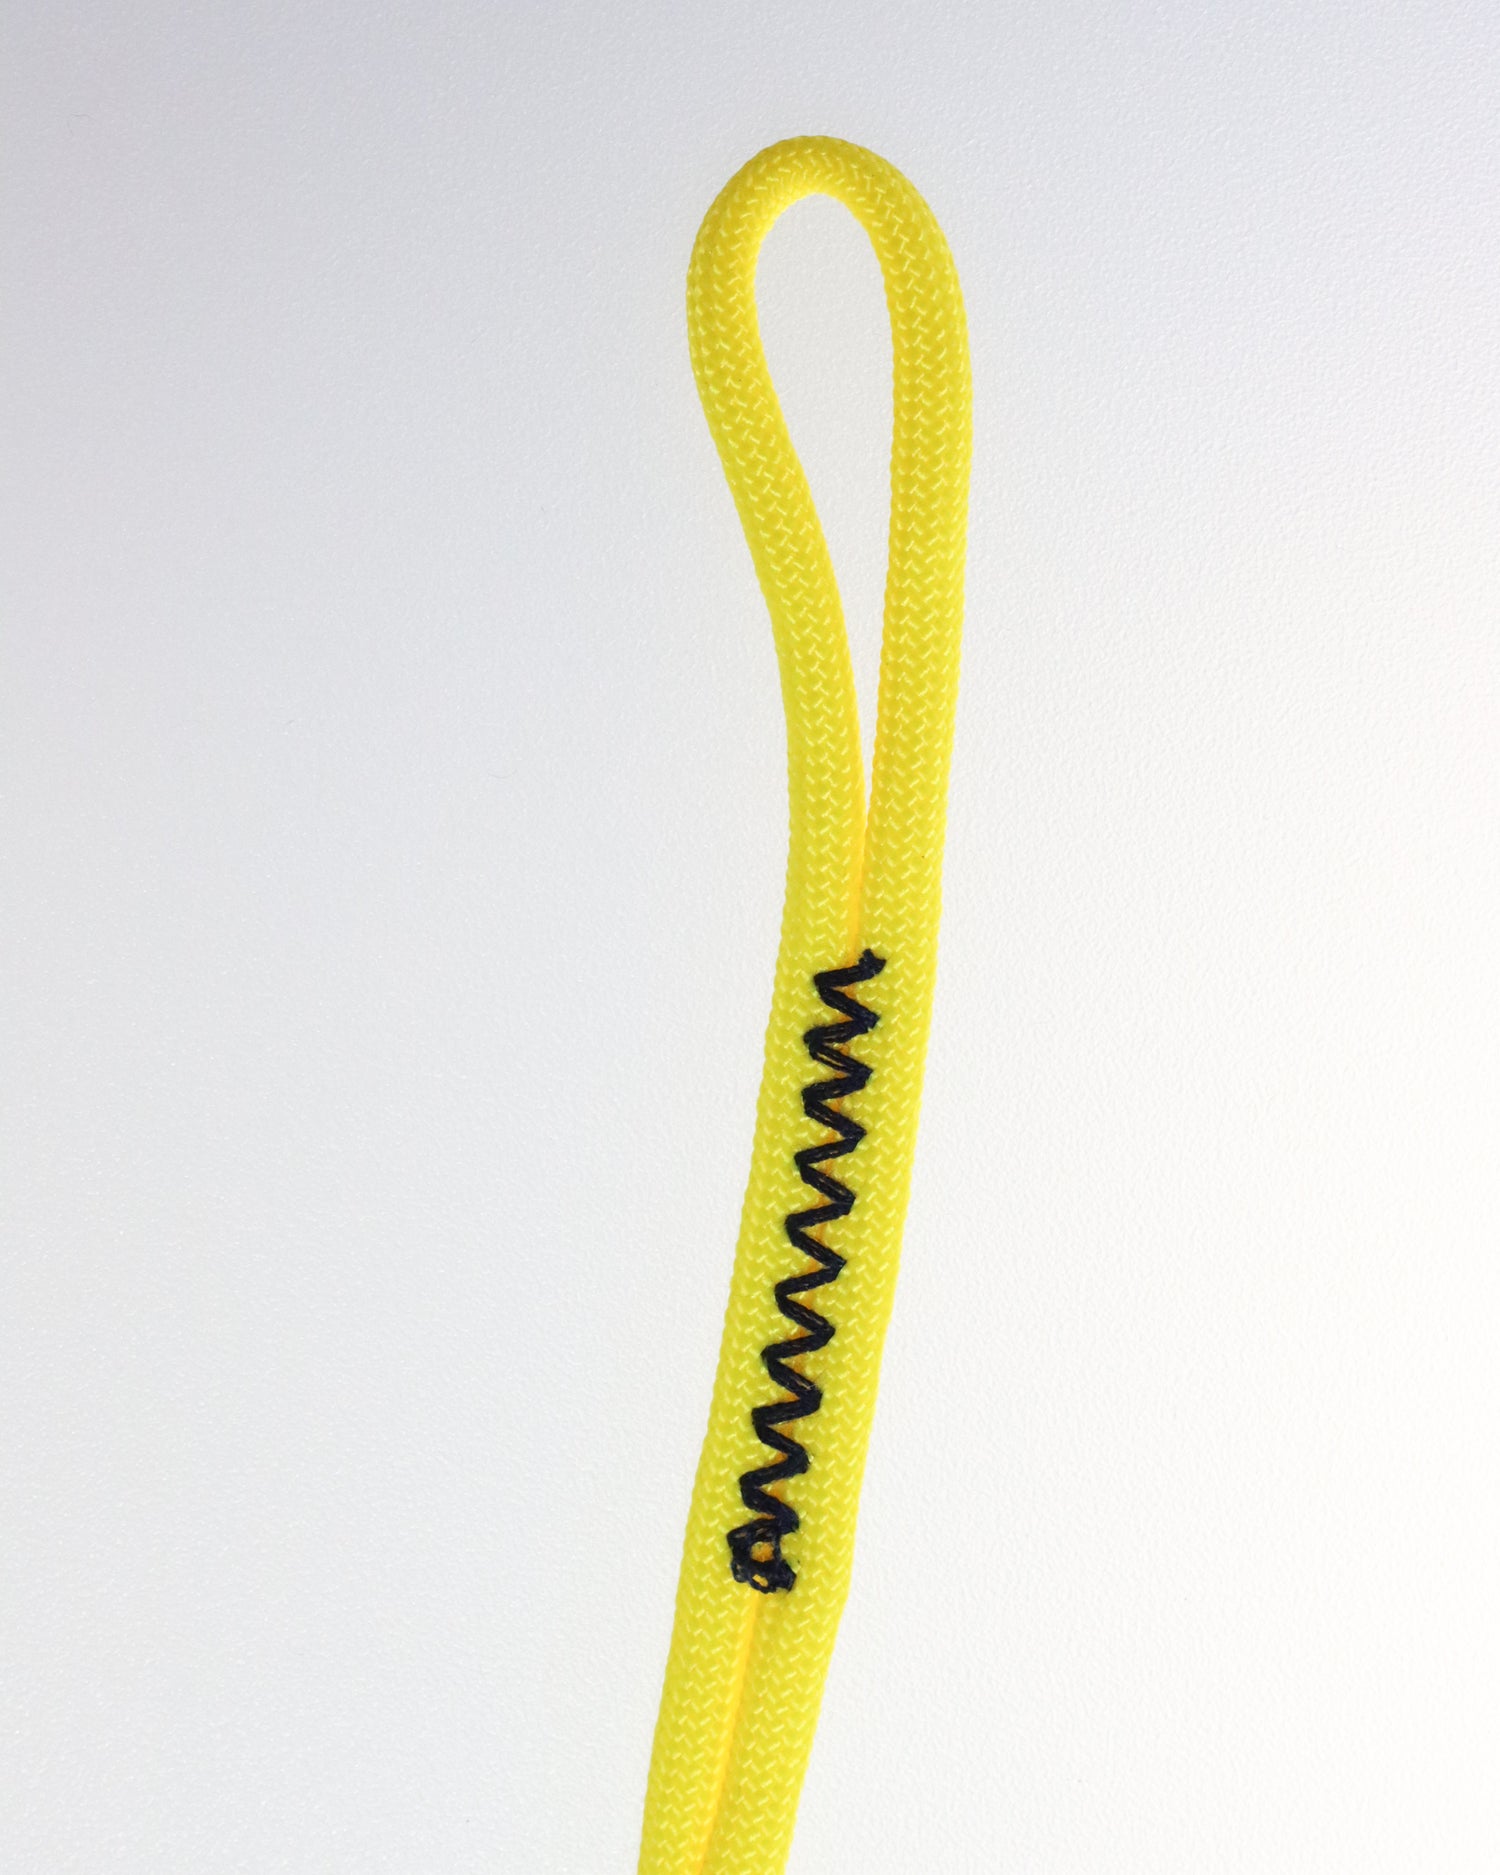 U.BAG Strap Extension made from paracord in color yellow